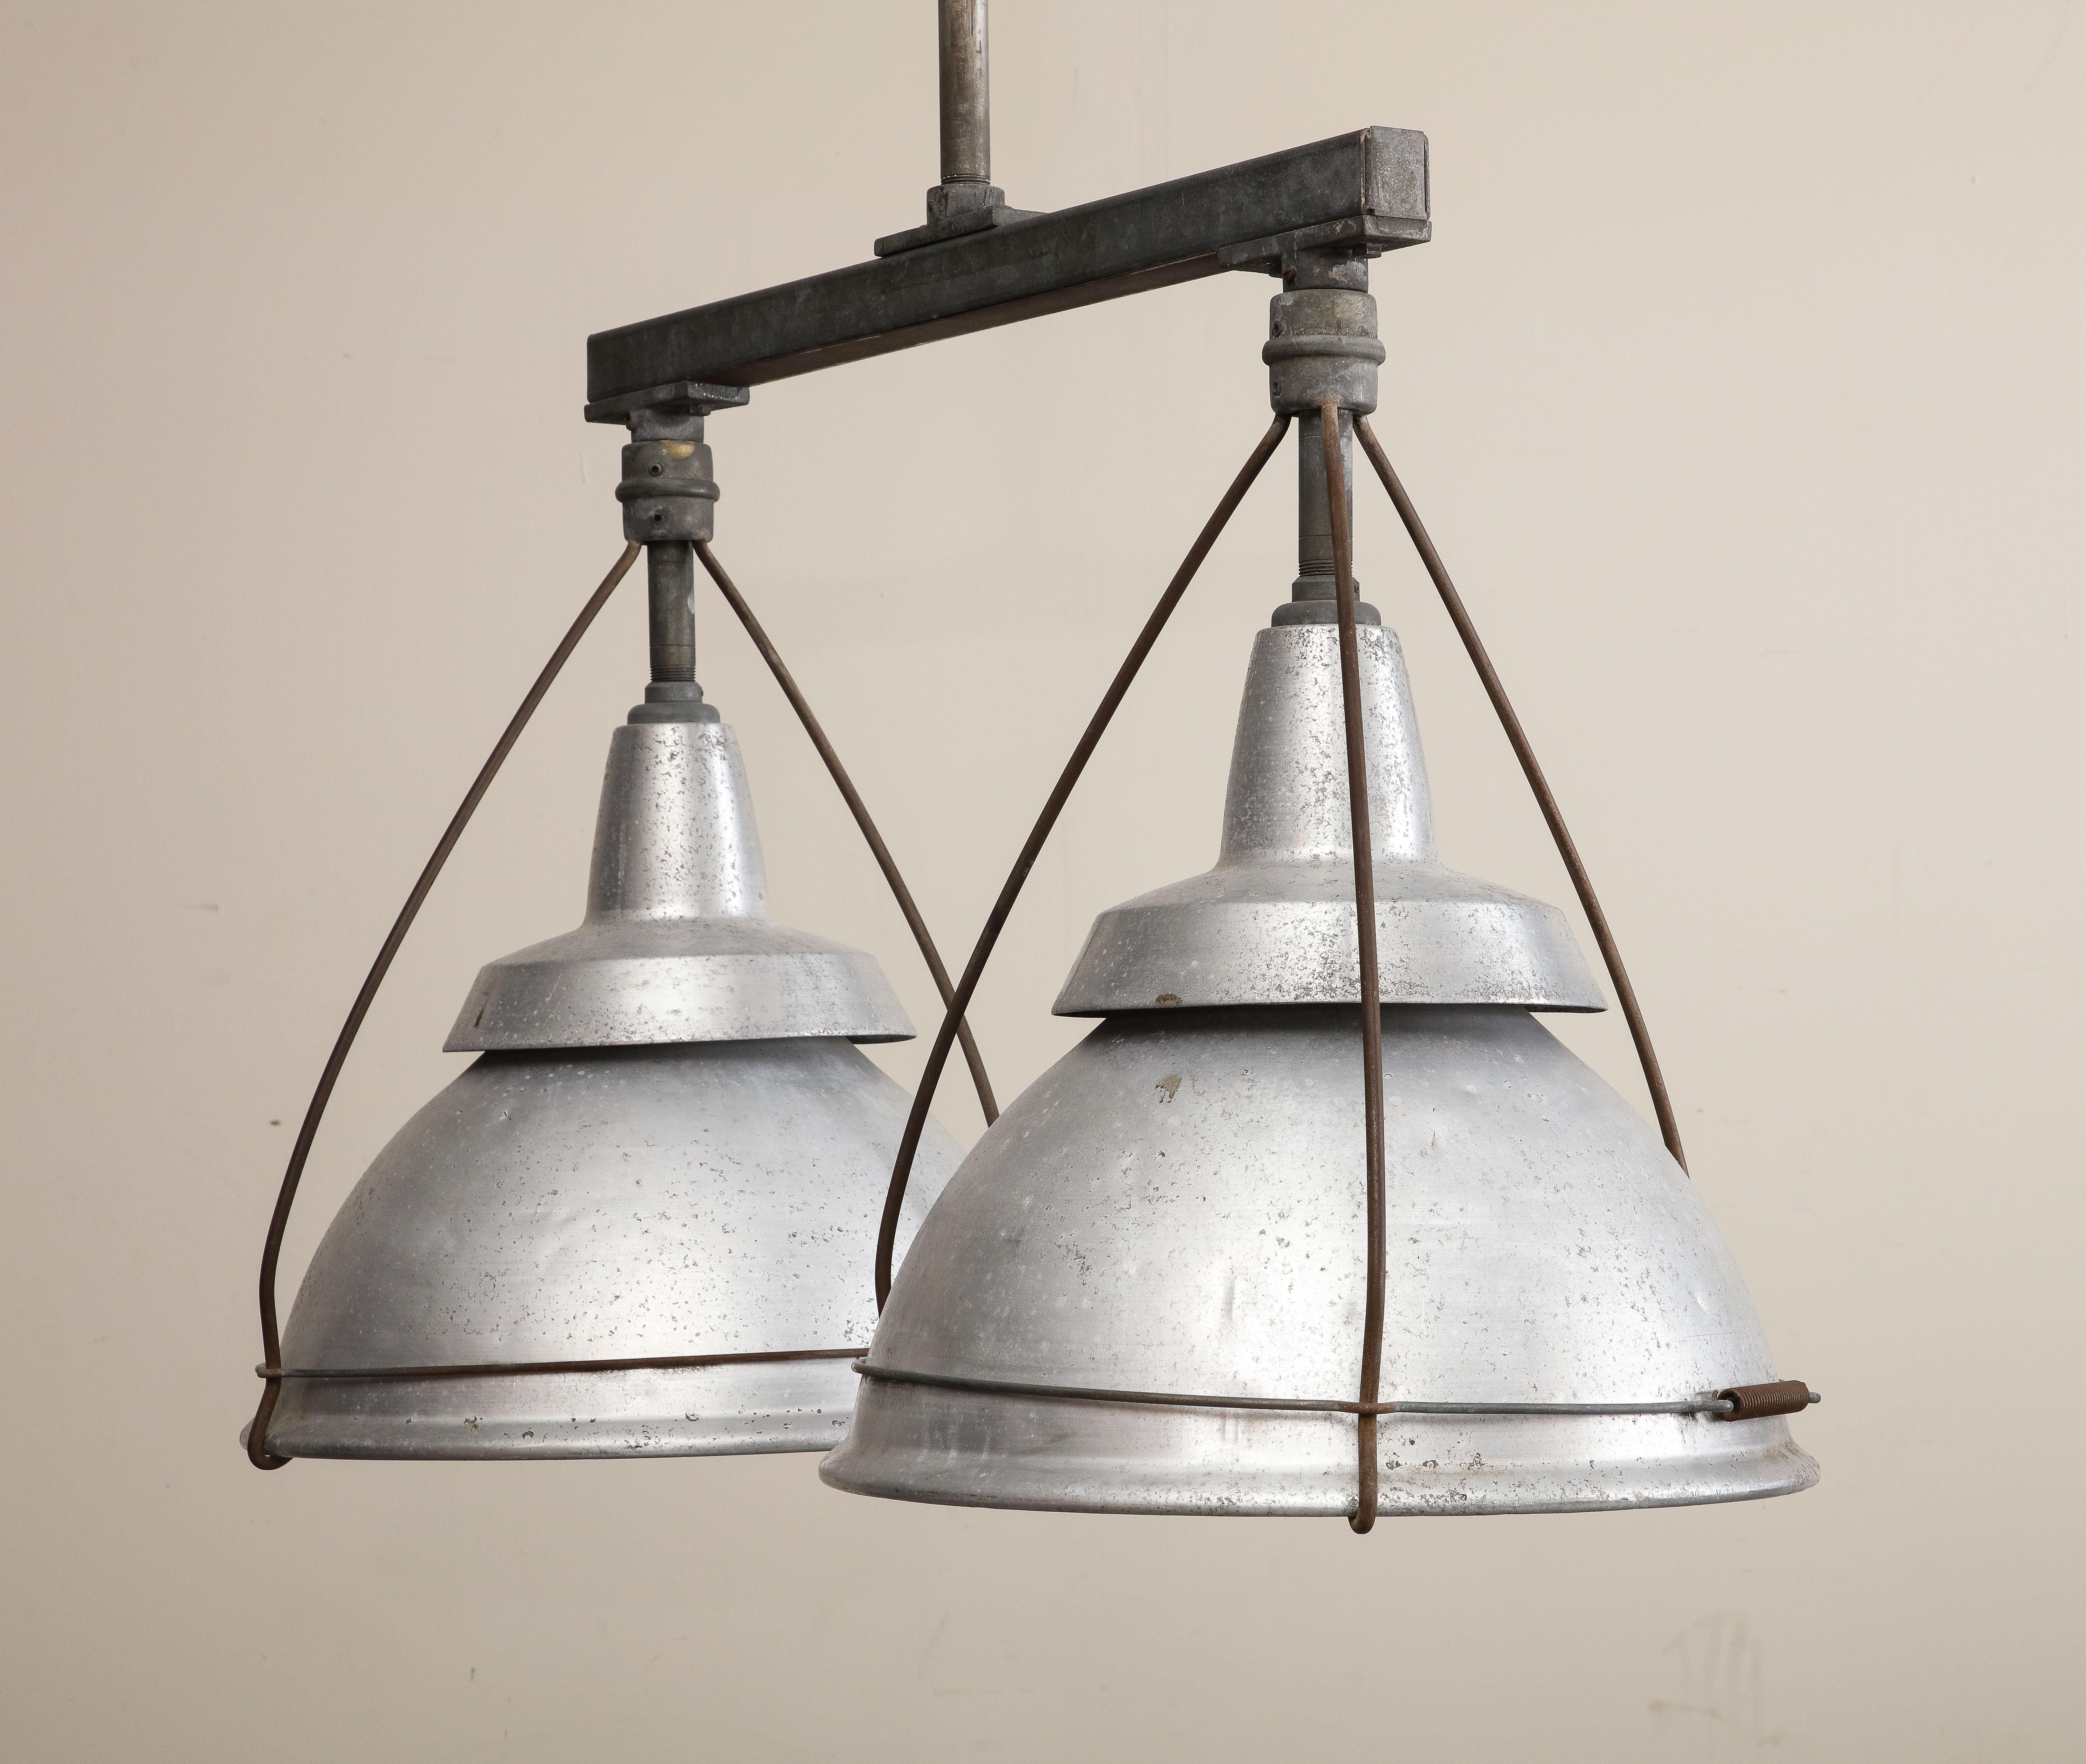 Large Ceiling-Mounted Industrial Double Pendant Light, C. 1920 For Sale 2